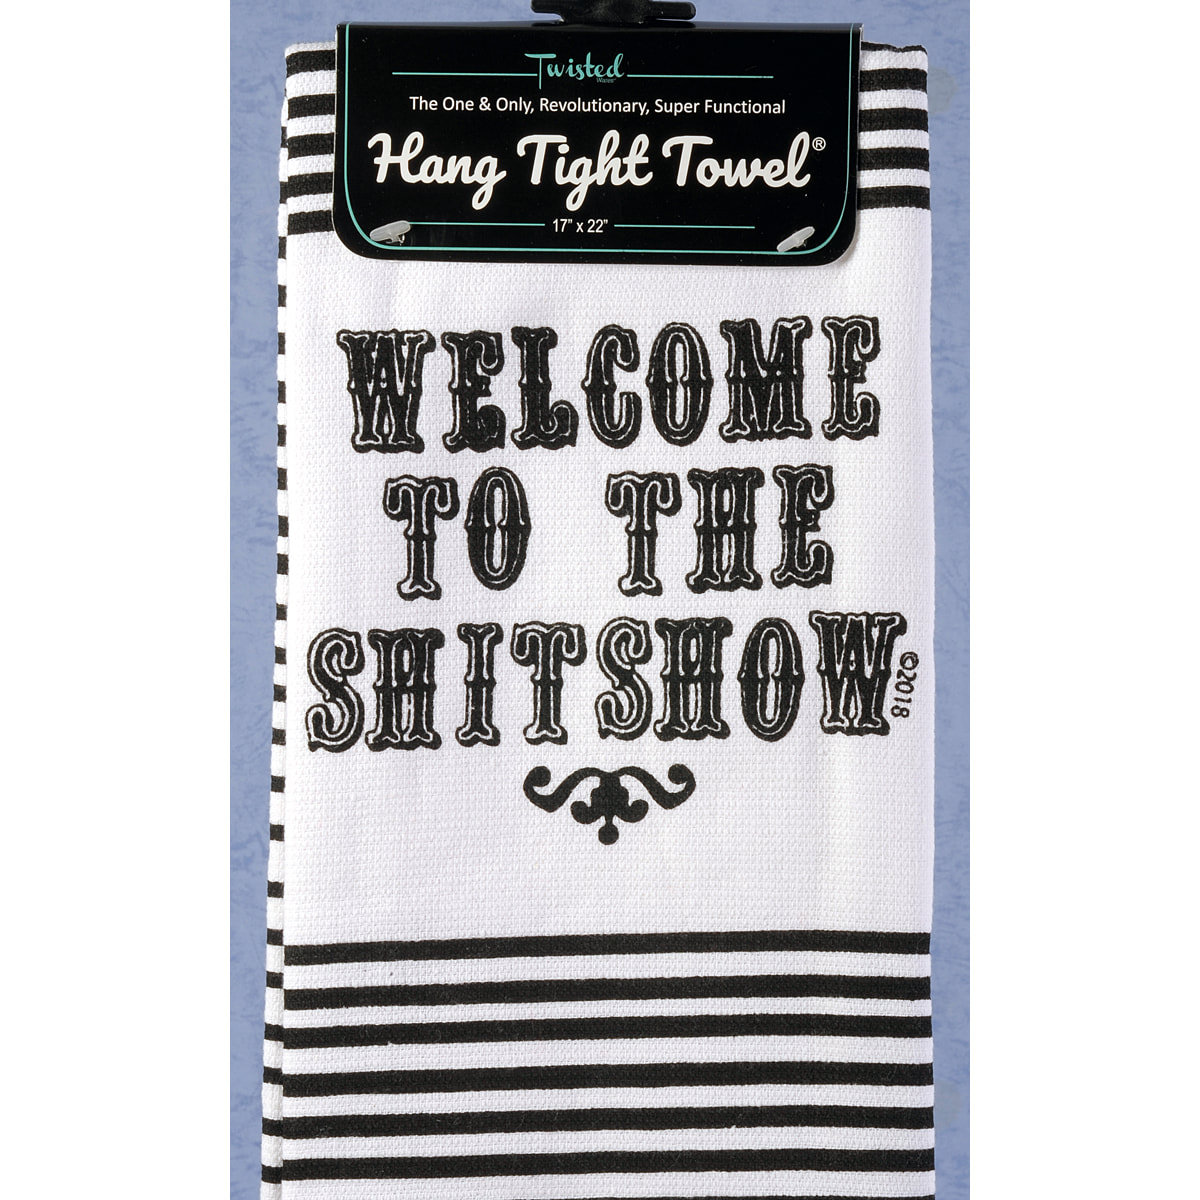 Twisted Wares Welcome to the Shitshow Hang Tight Terry Towel - SoSlanty